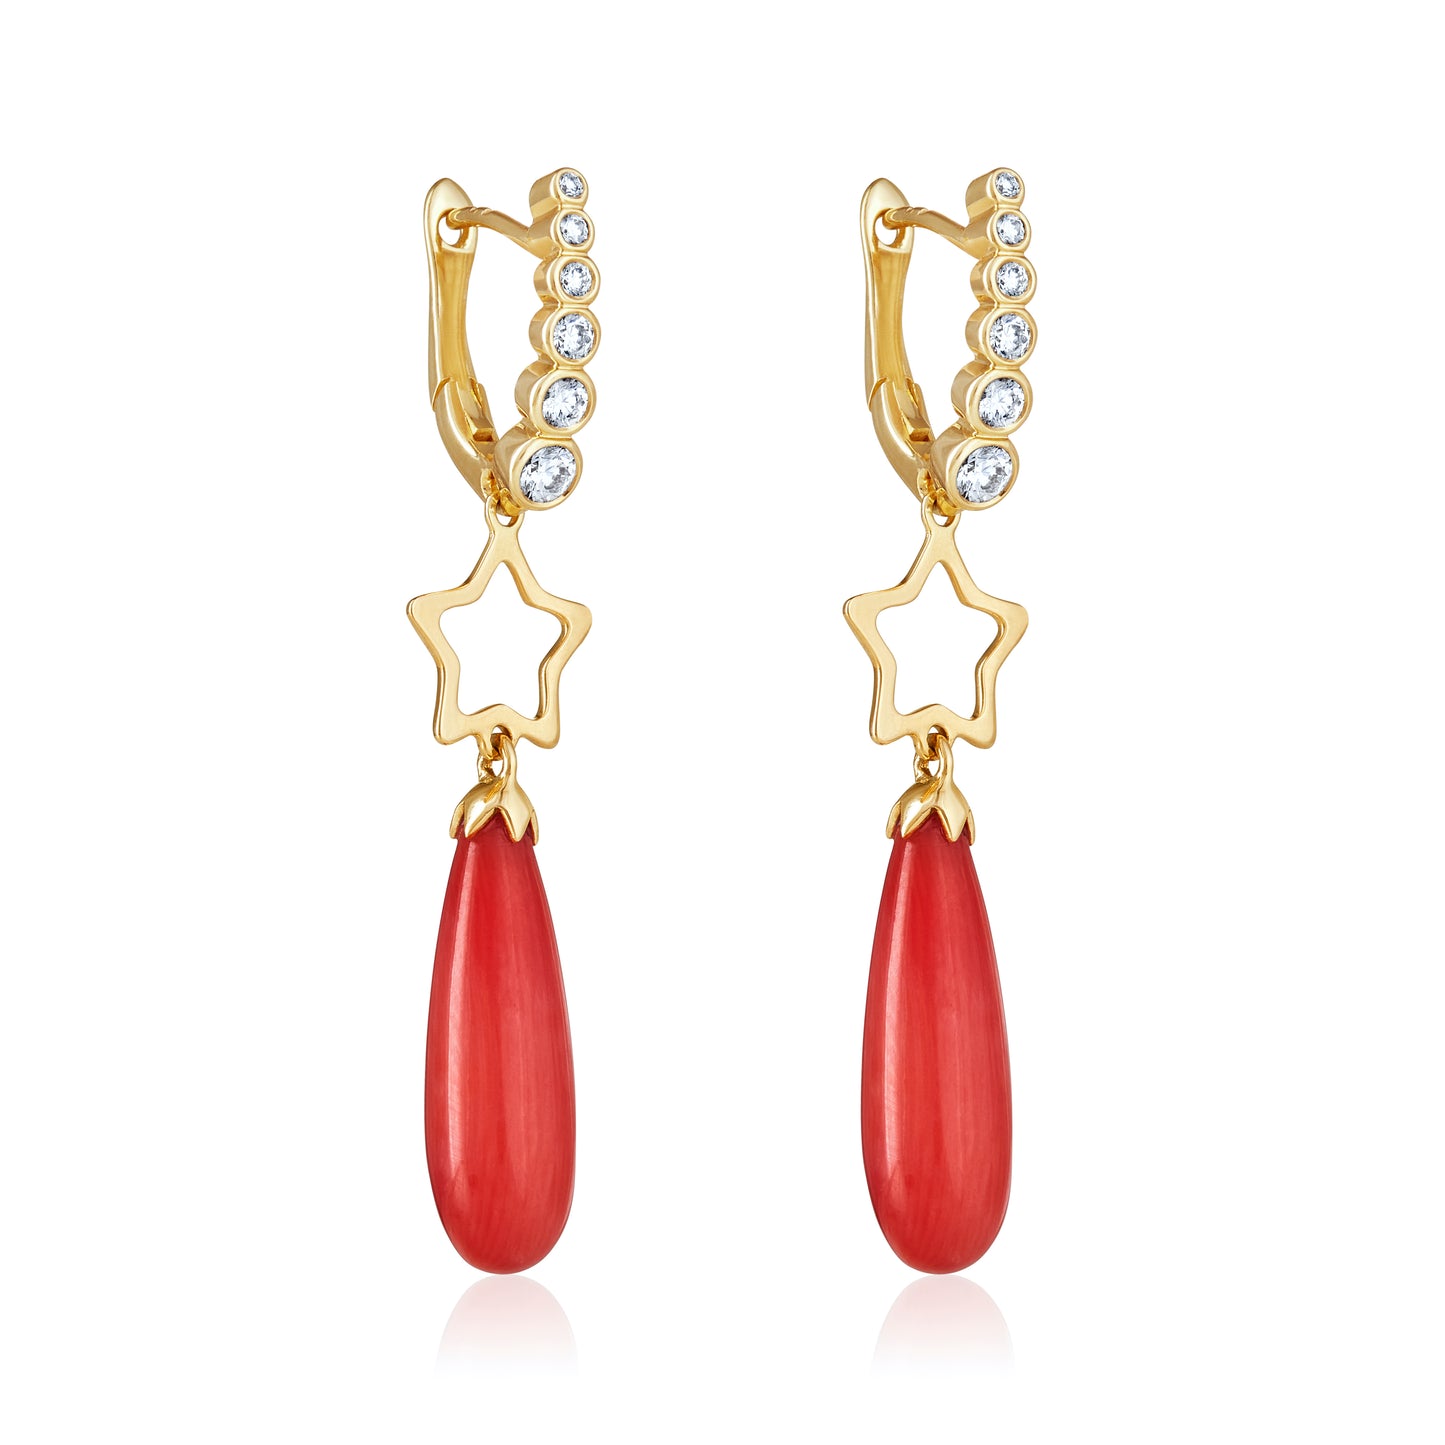 Magic Wish 18ct Yellow Gold, Diamond & Coral Short Drop Earrings with Open Star